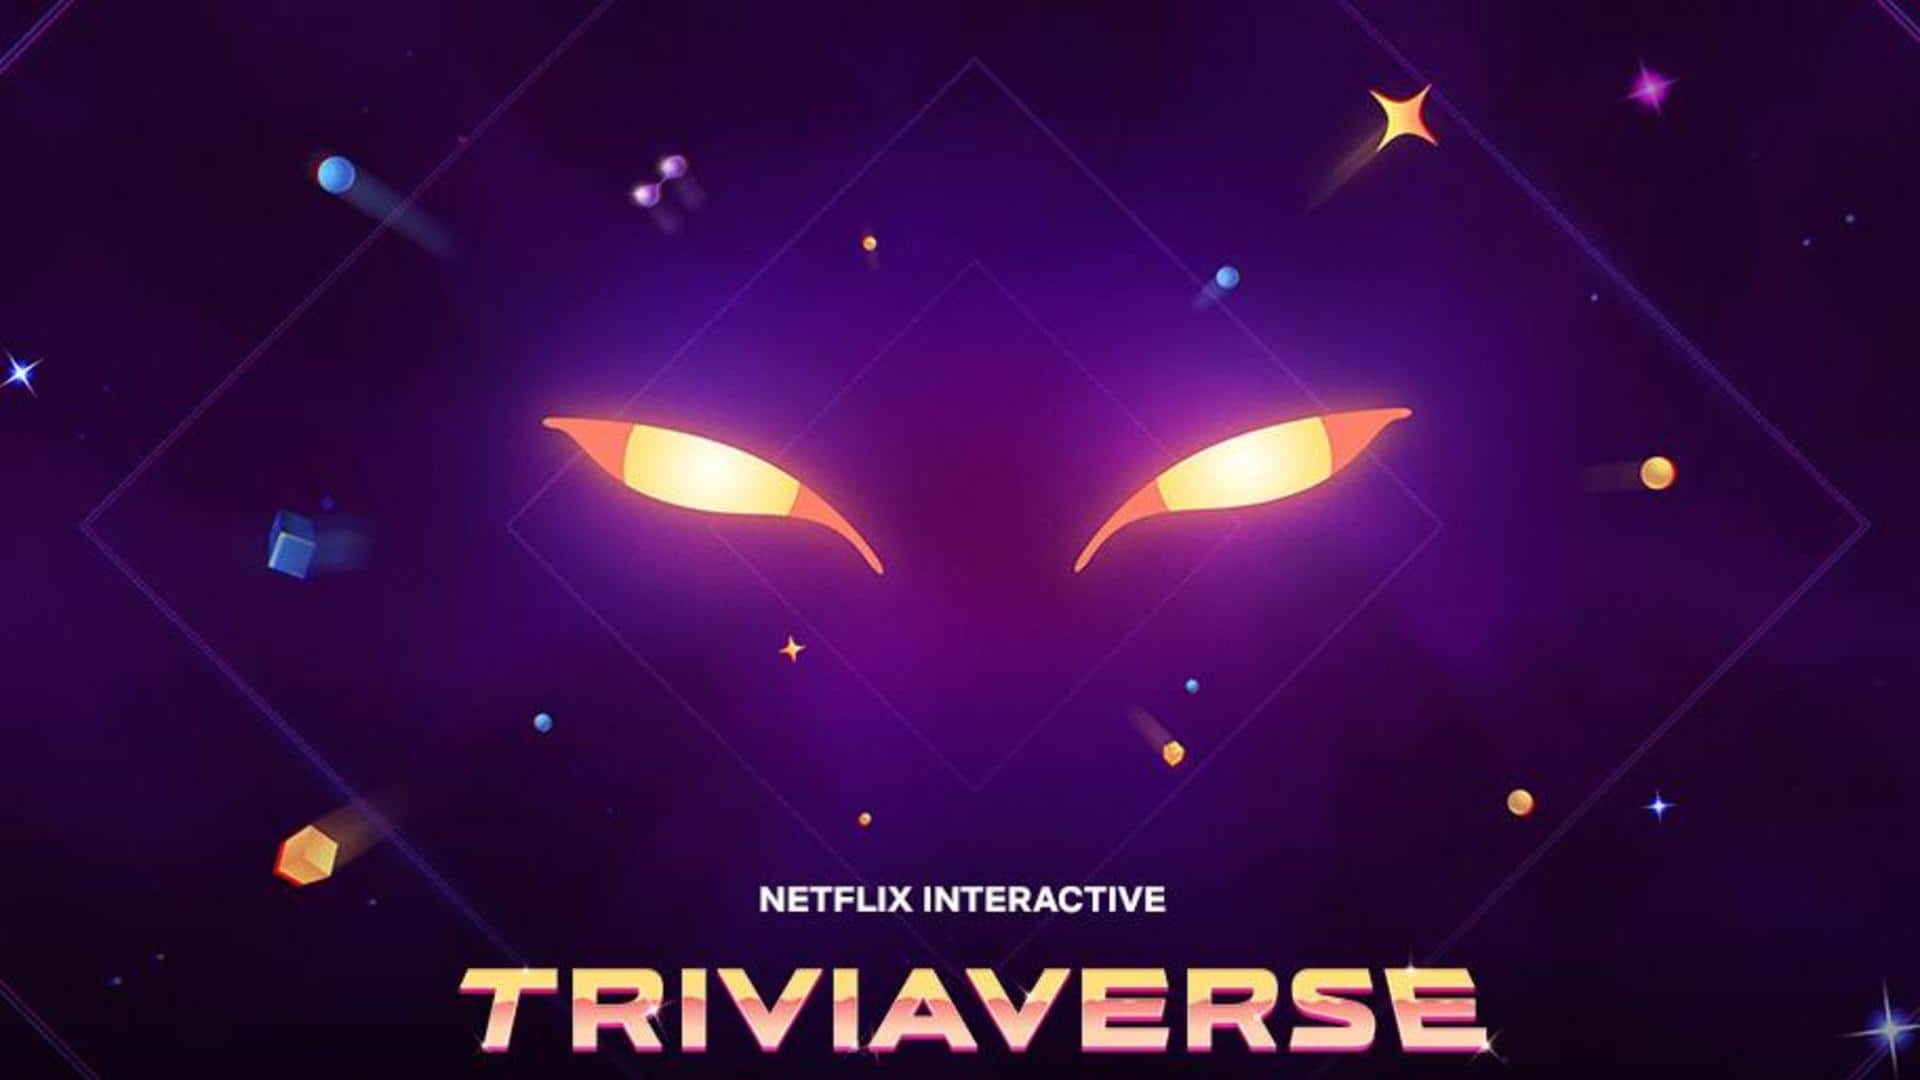 Netflix introduces new trivia game to test your knowledge